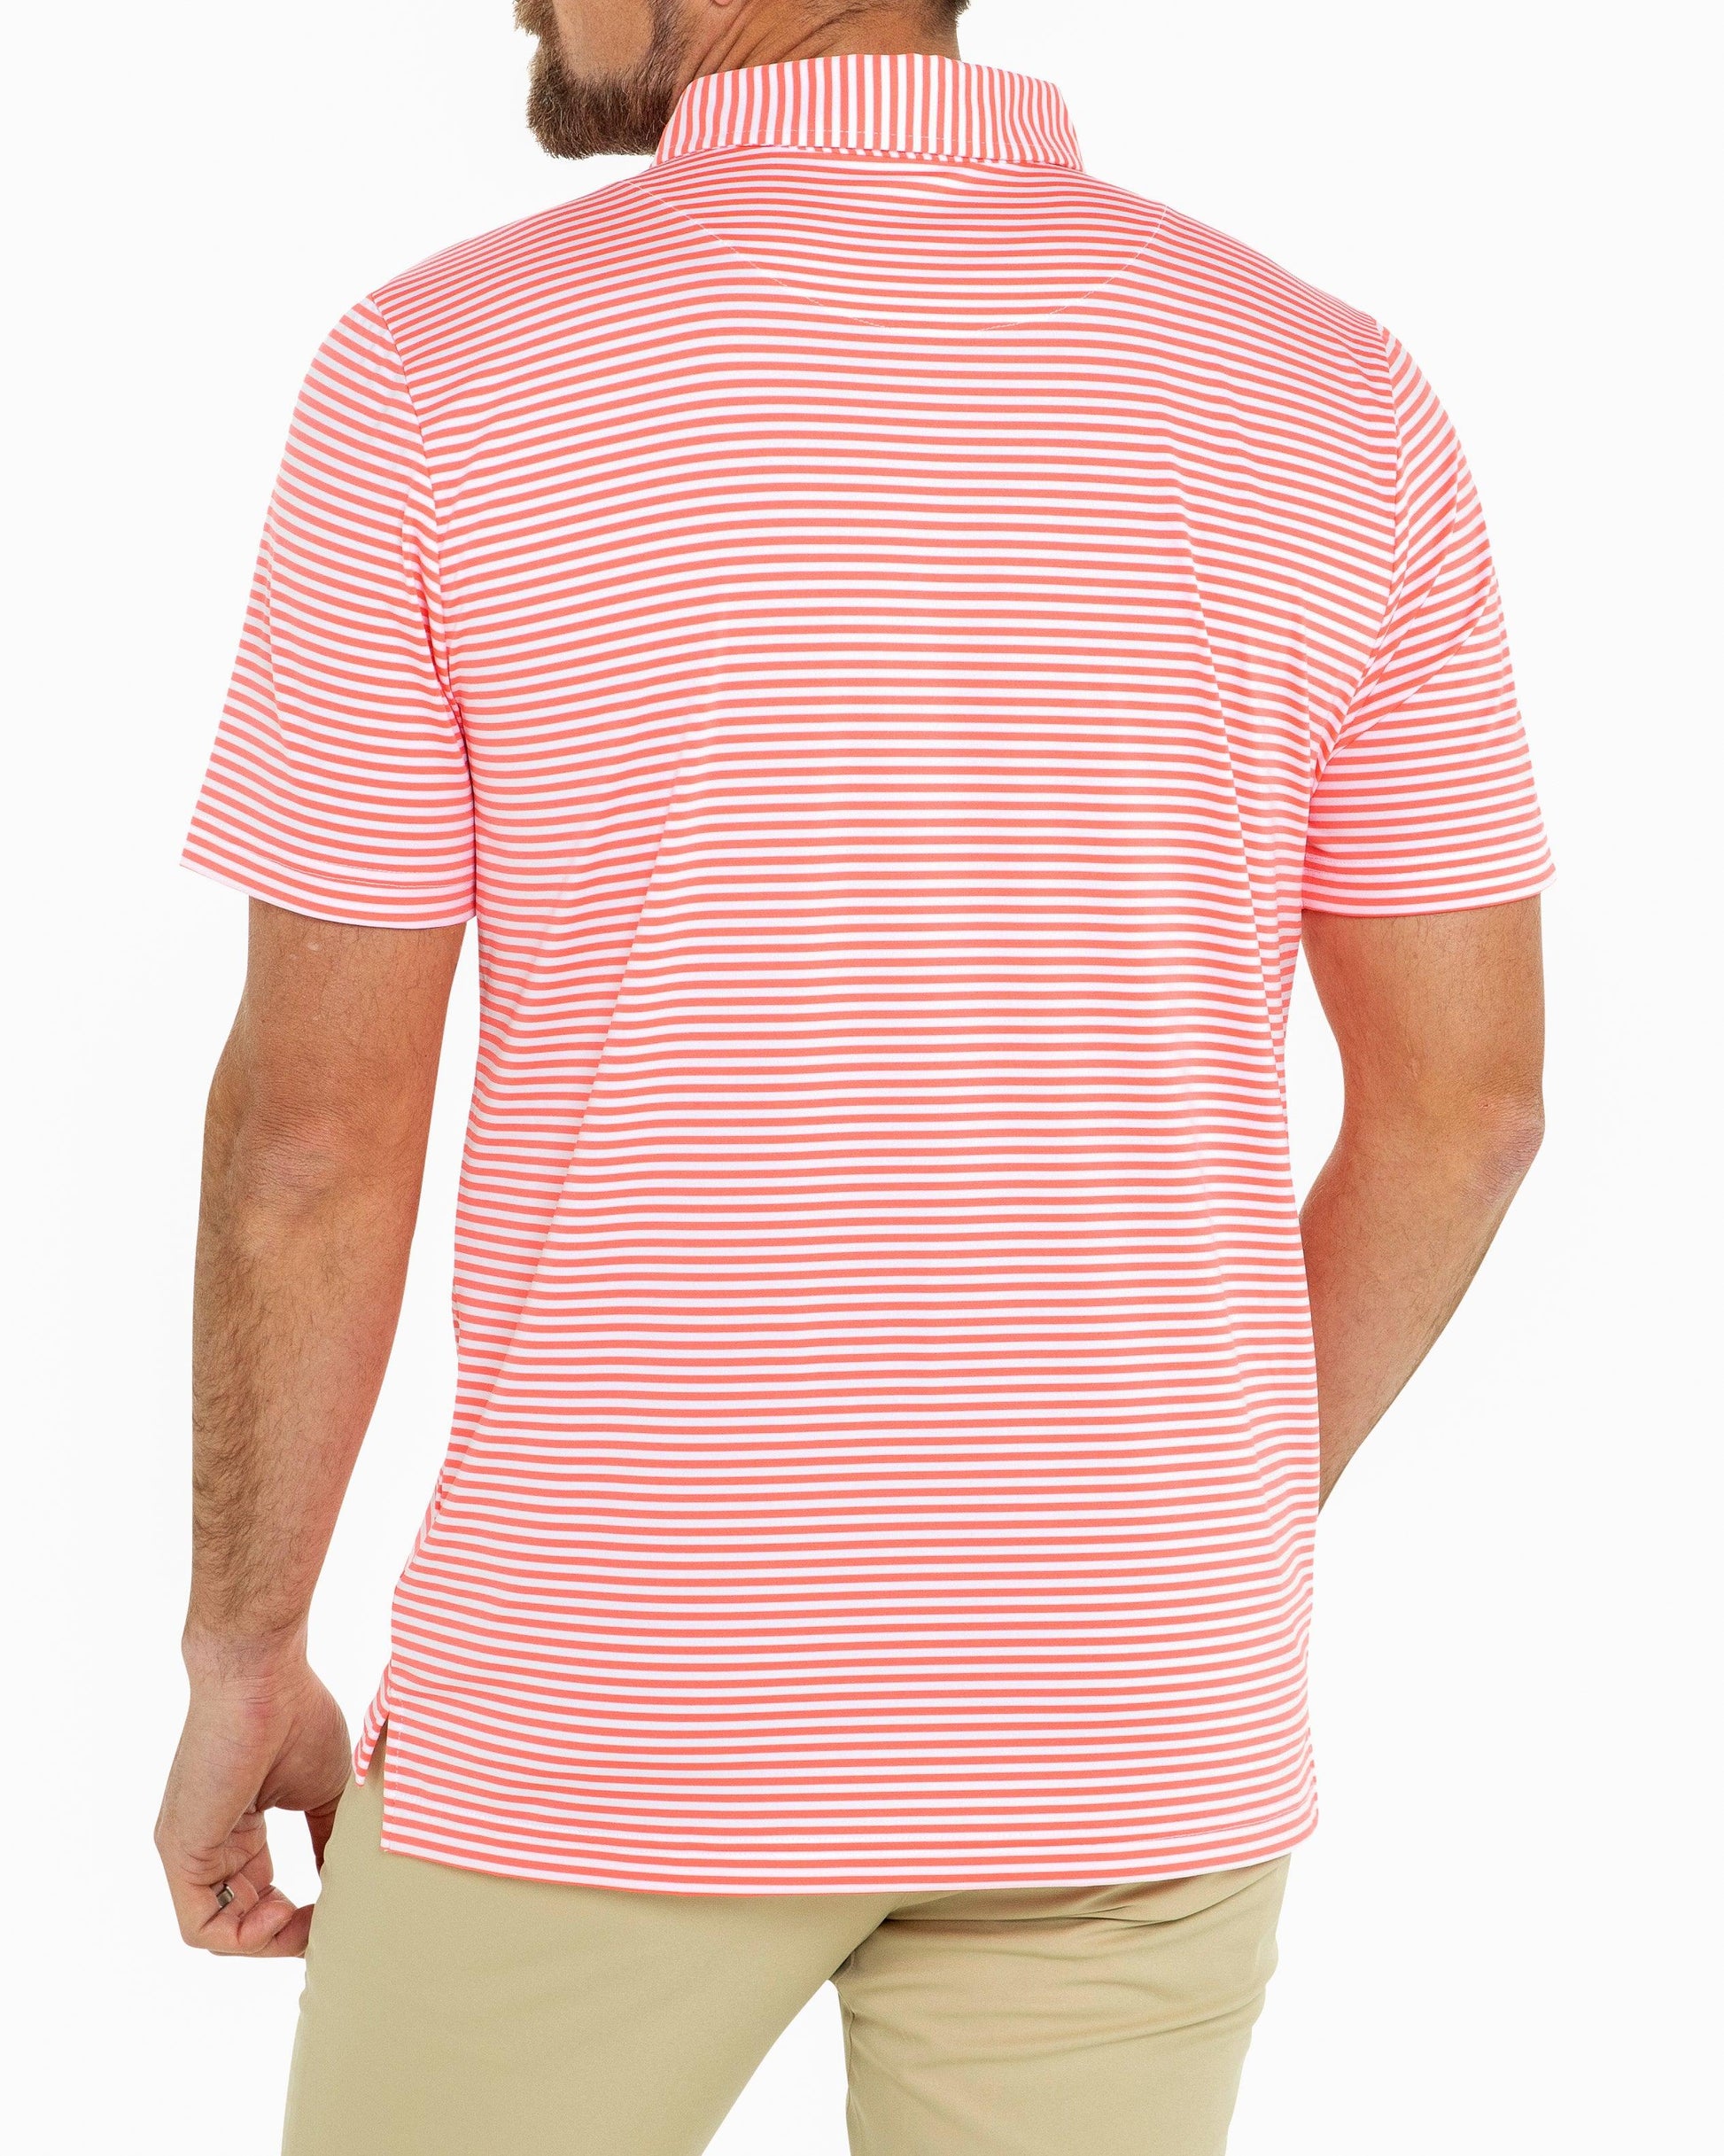 Sunset Polo | Performance Golf Polo From Good Good